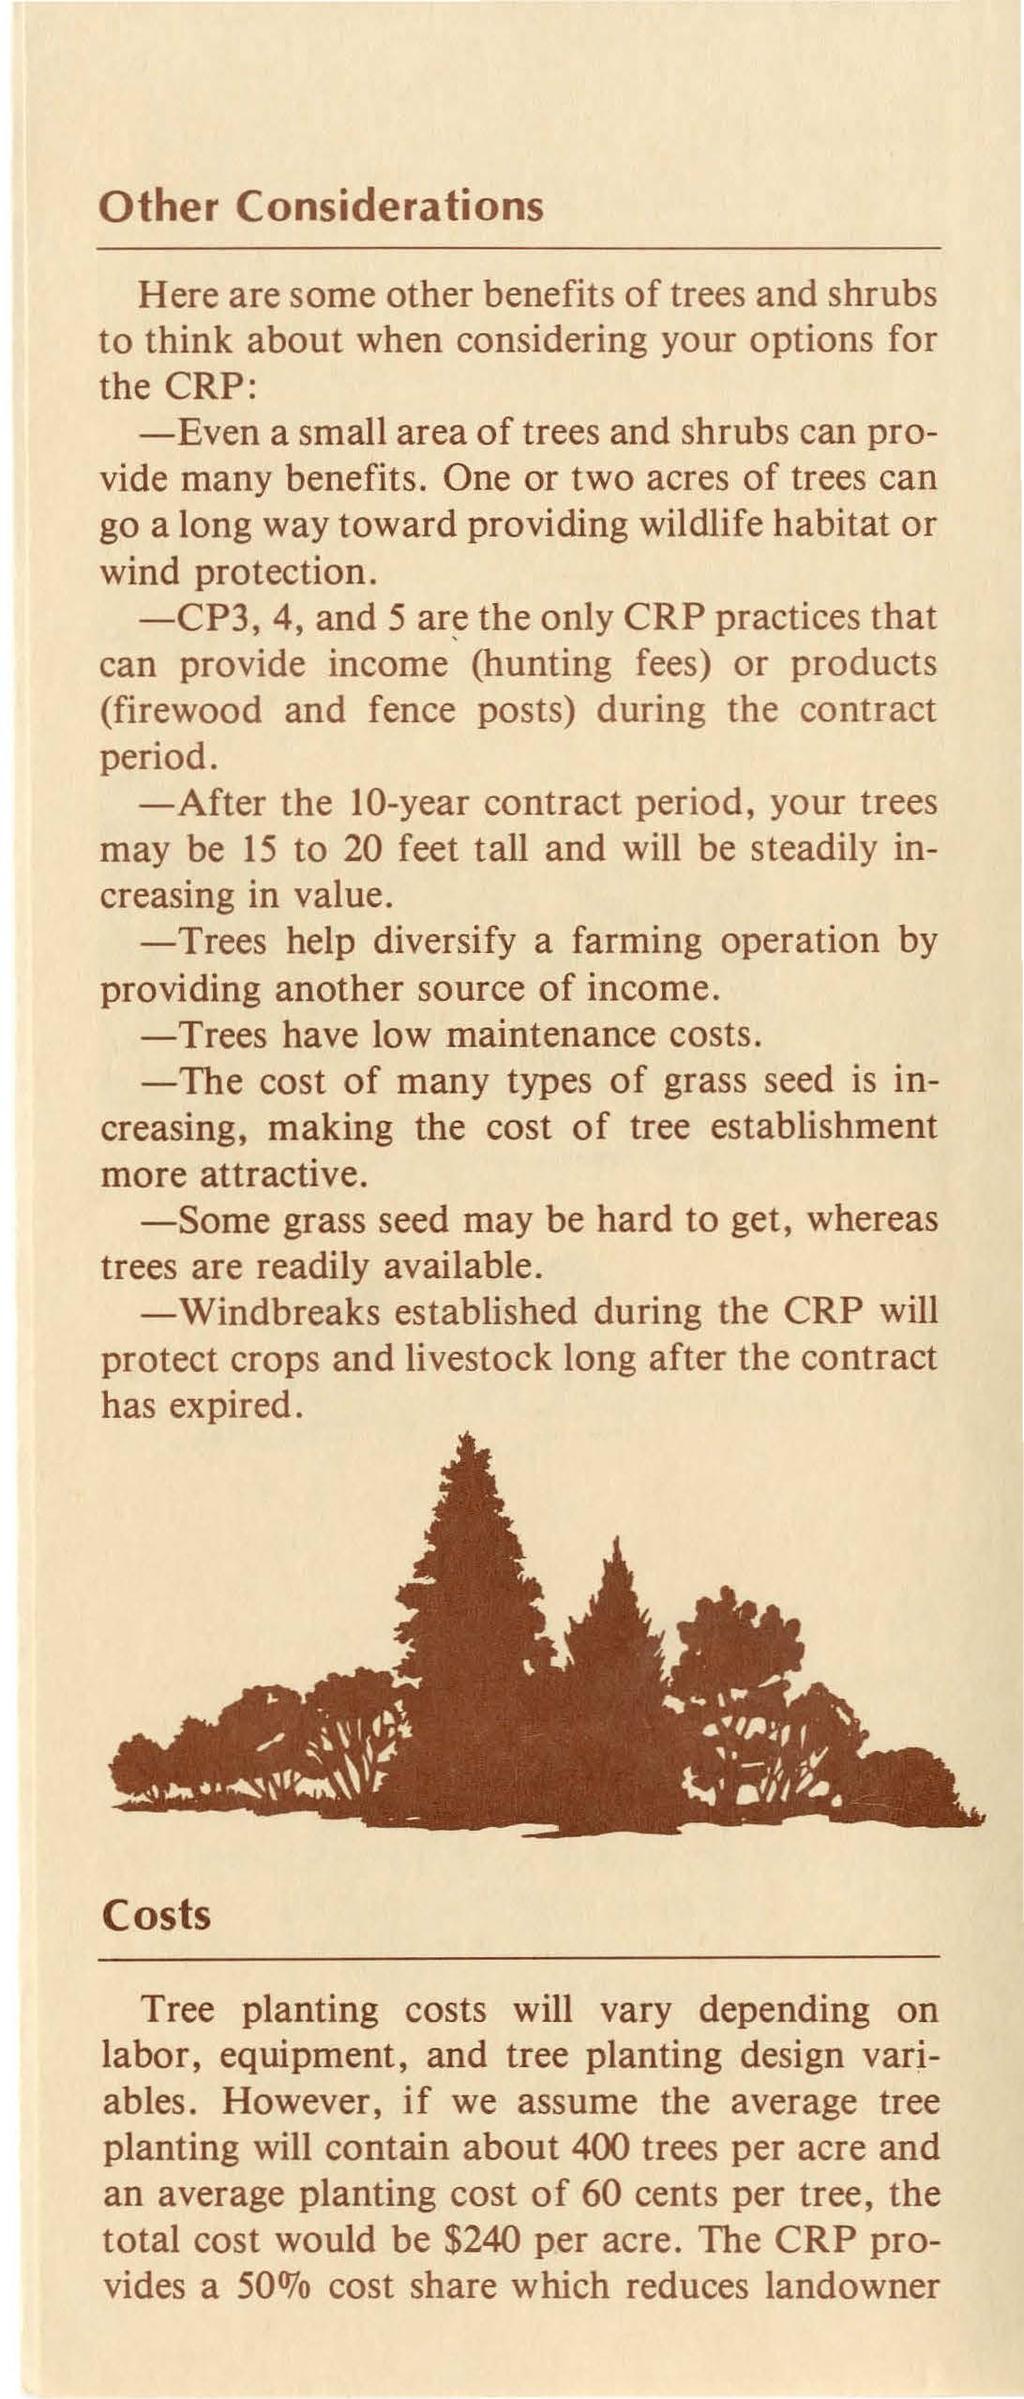 Other Considerations Here are some other benefits of trees and shrubs to think about when considering your options for the CRP: -Even a small area of trees and shrubs can provide many benefits.